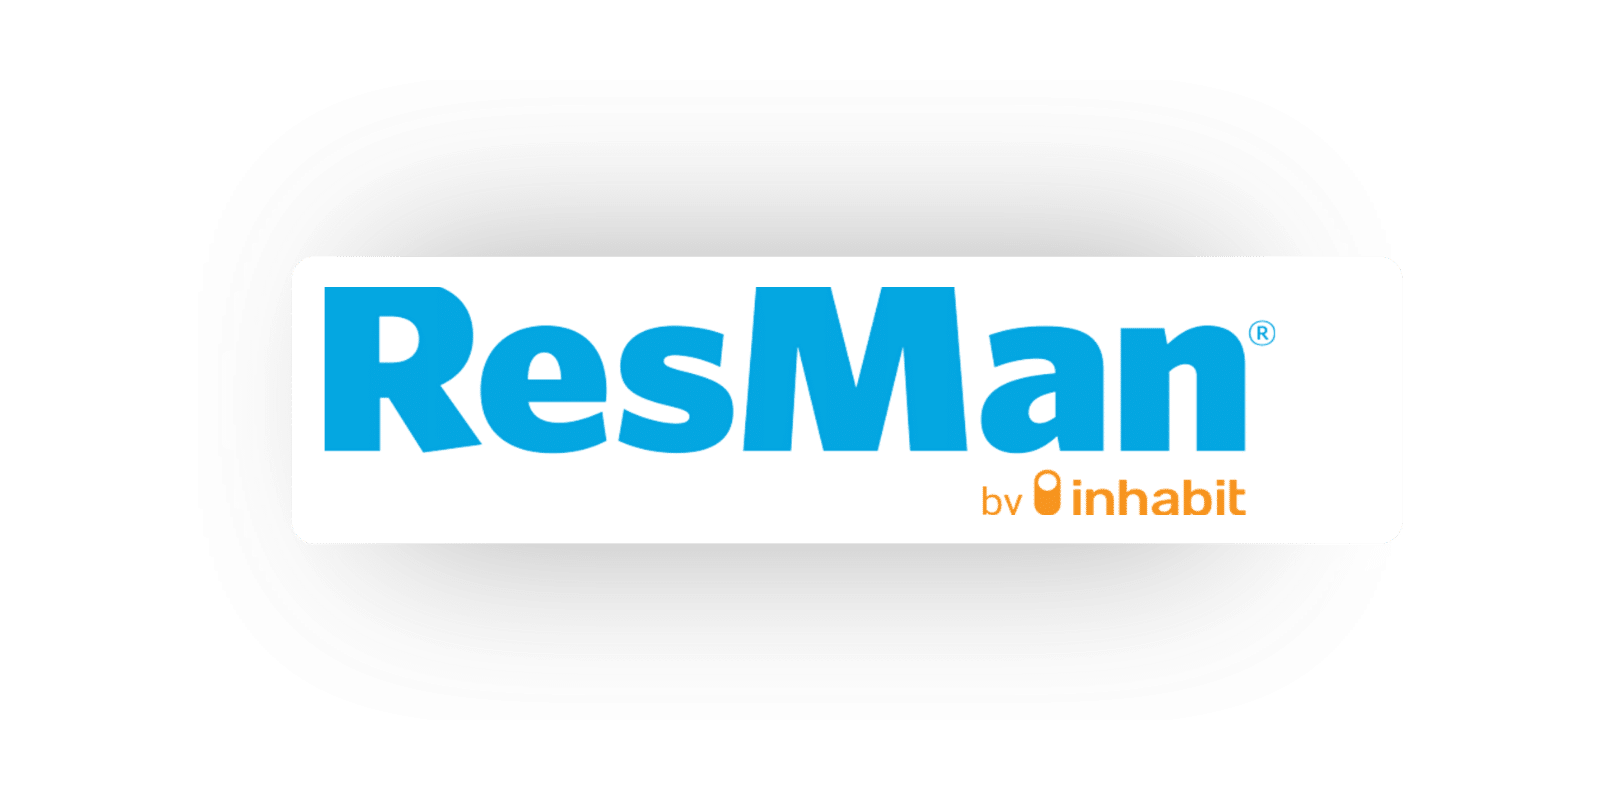 We are proud to offer an API integration for securely communicating resident data from ResMan property management software to our survey solutions. This secure API ensures accurate data and a faster survey launch.